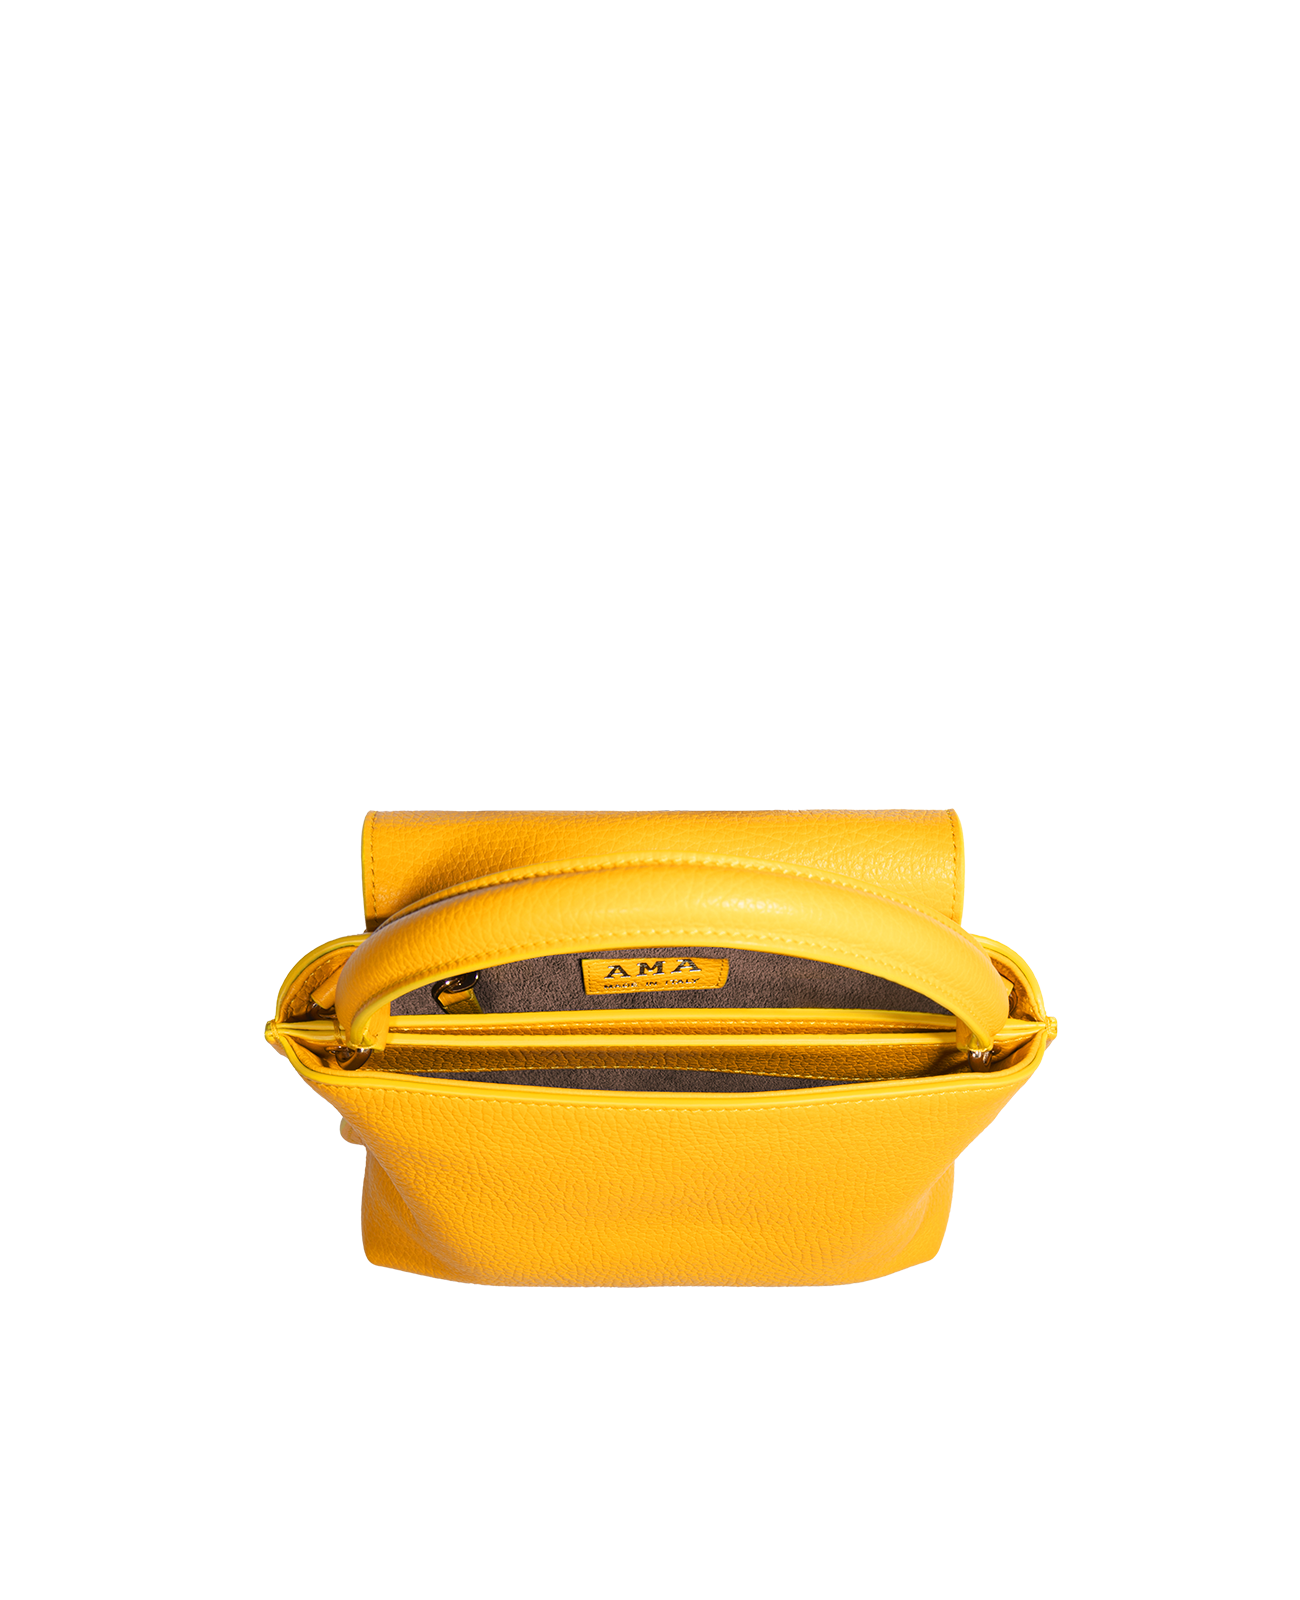 Cross-body bag in Italian full-grain leather, semi-aniline calf Italian leather with detachable shoulder strap.Three compartments, zip pocket in the back compartment. Magnetic flap closure with logo. Color: Yellow. Size:Medium